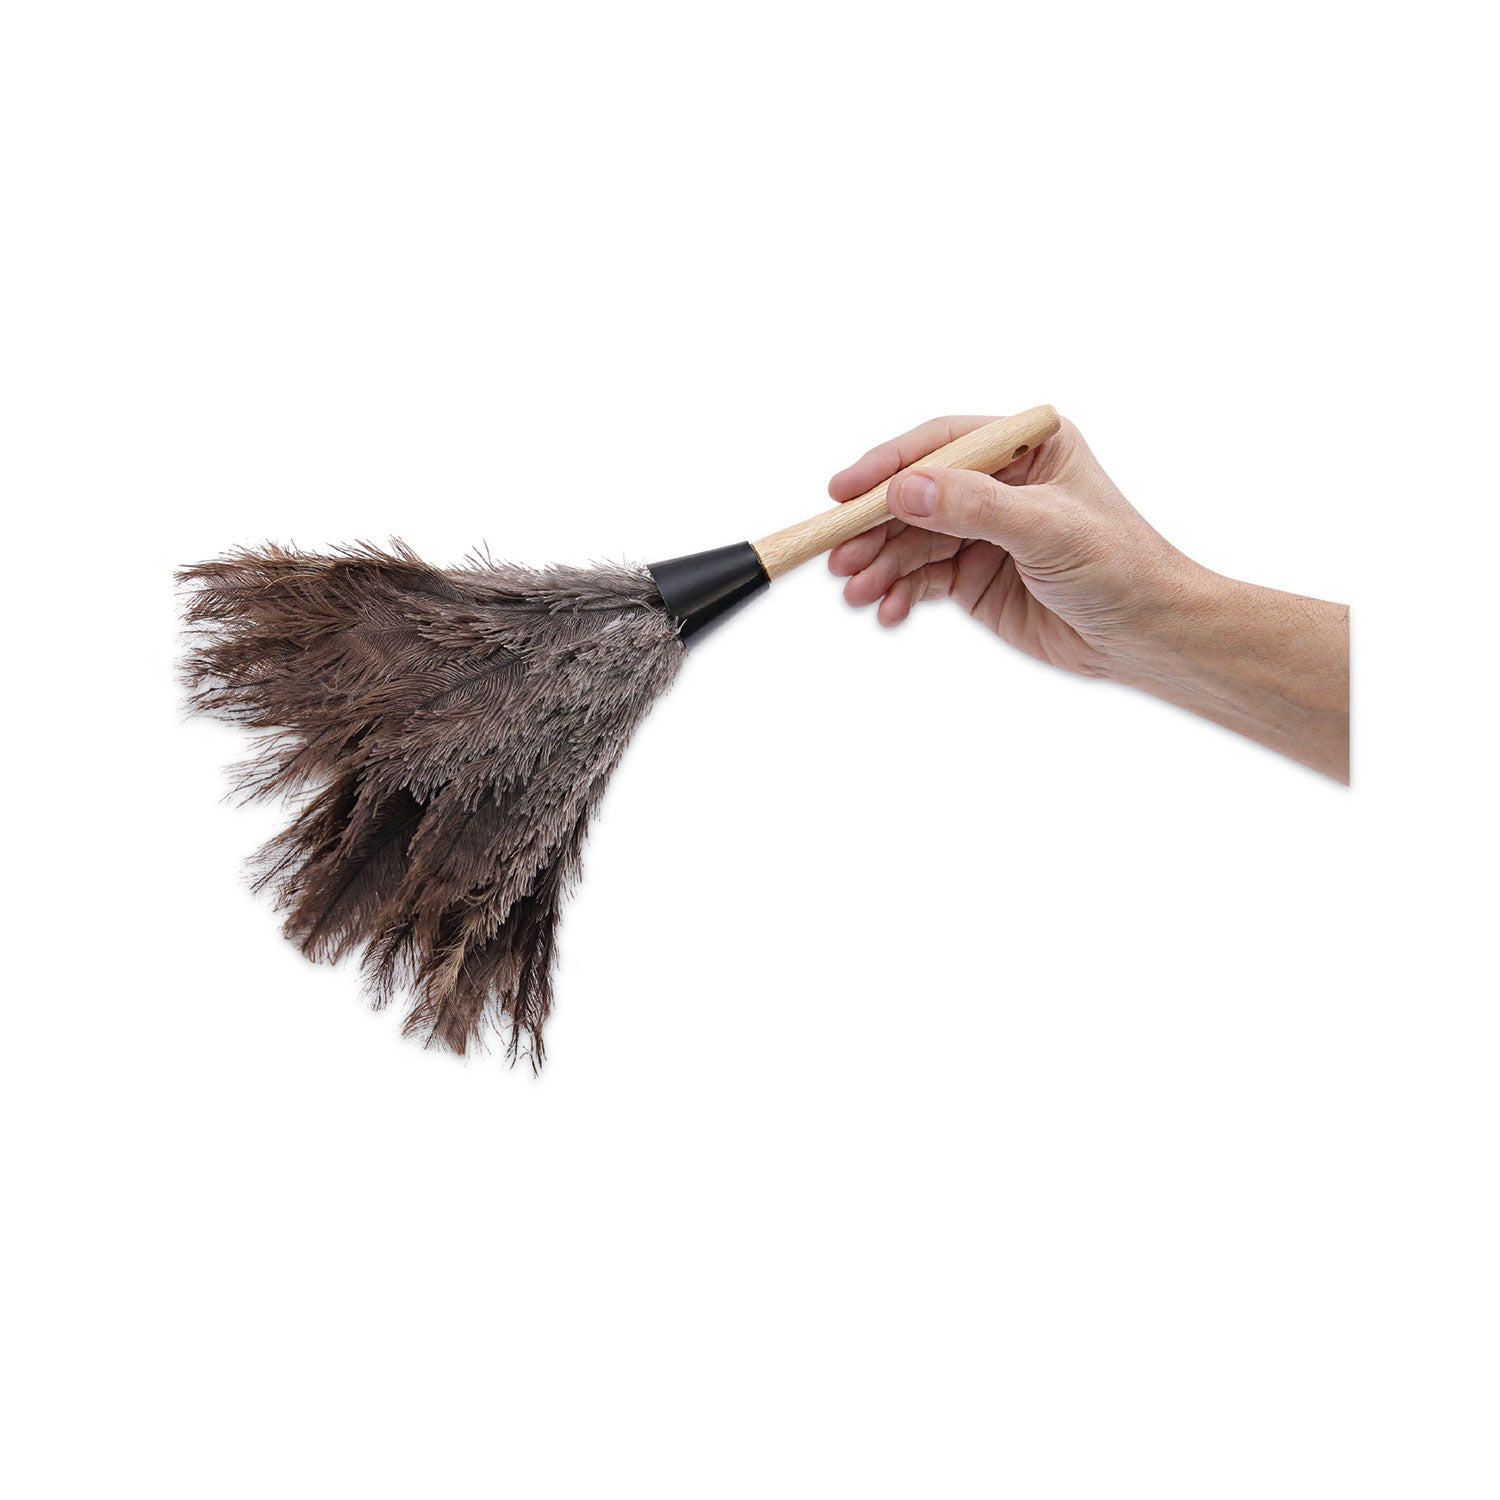 professional-ostrich-feather-duster-gray-14-length-6-handle_bwk14fd - 6